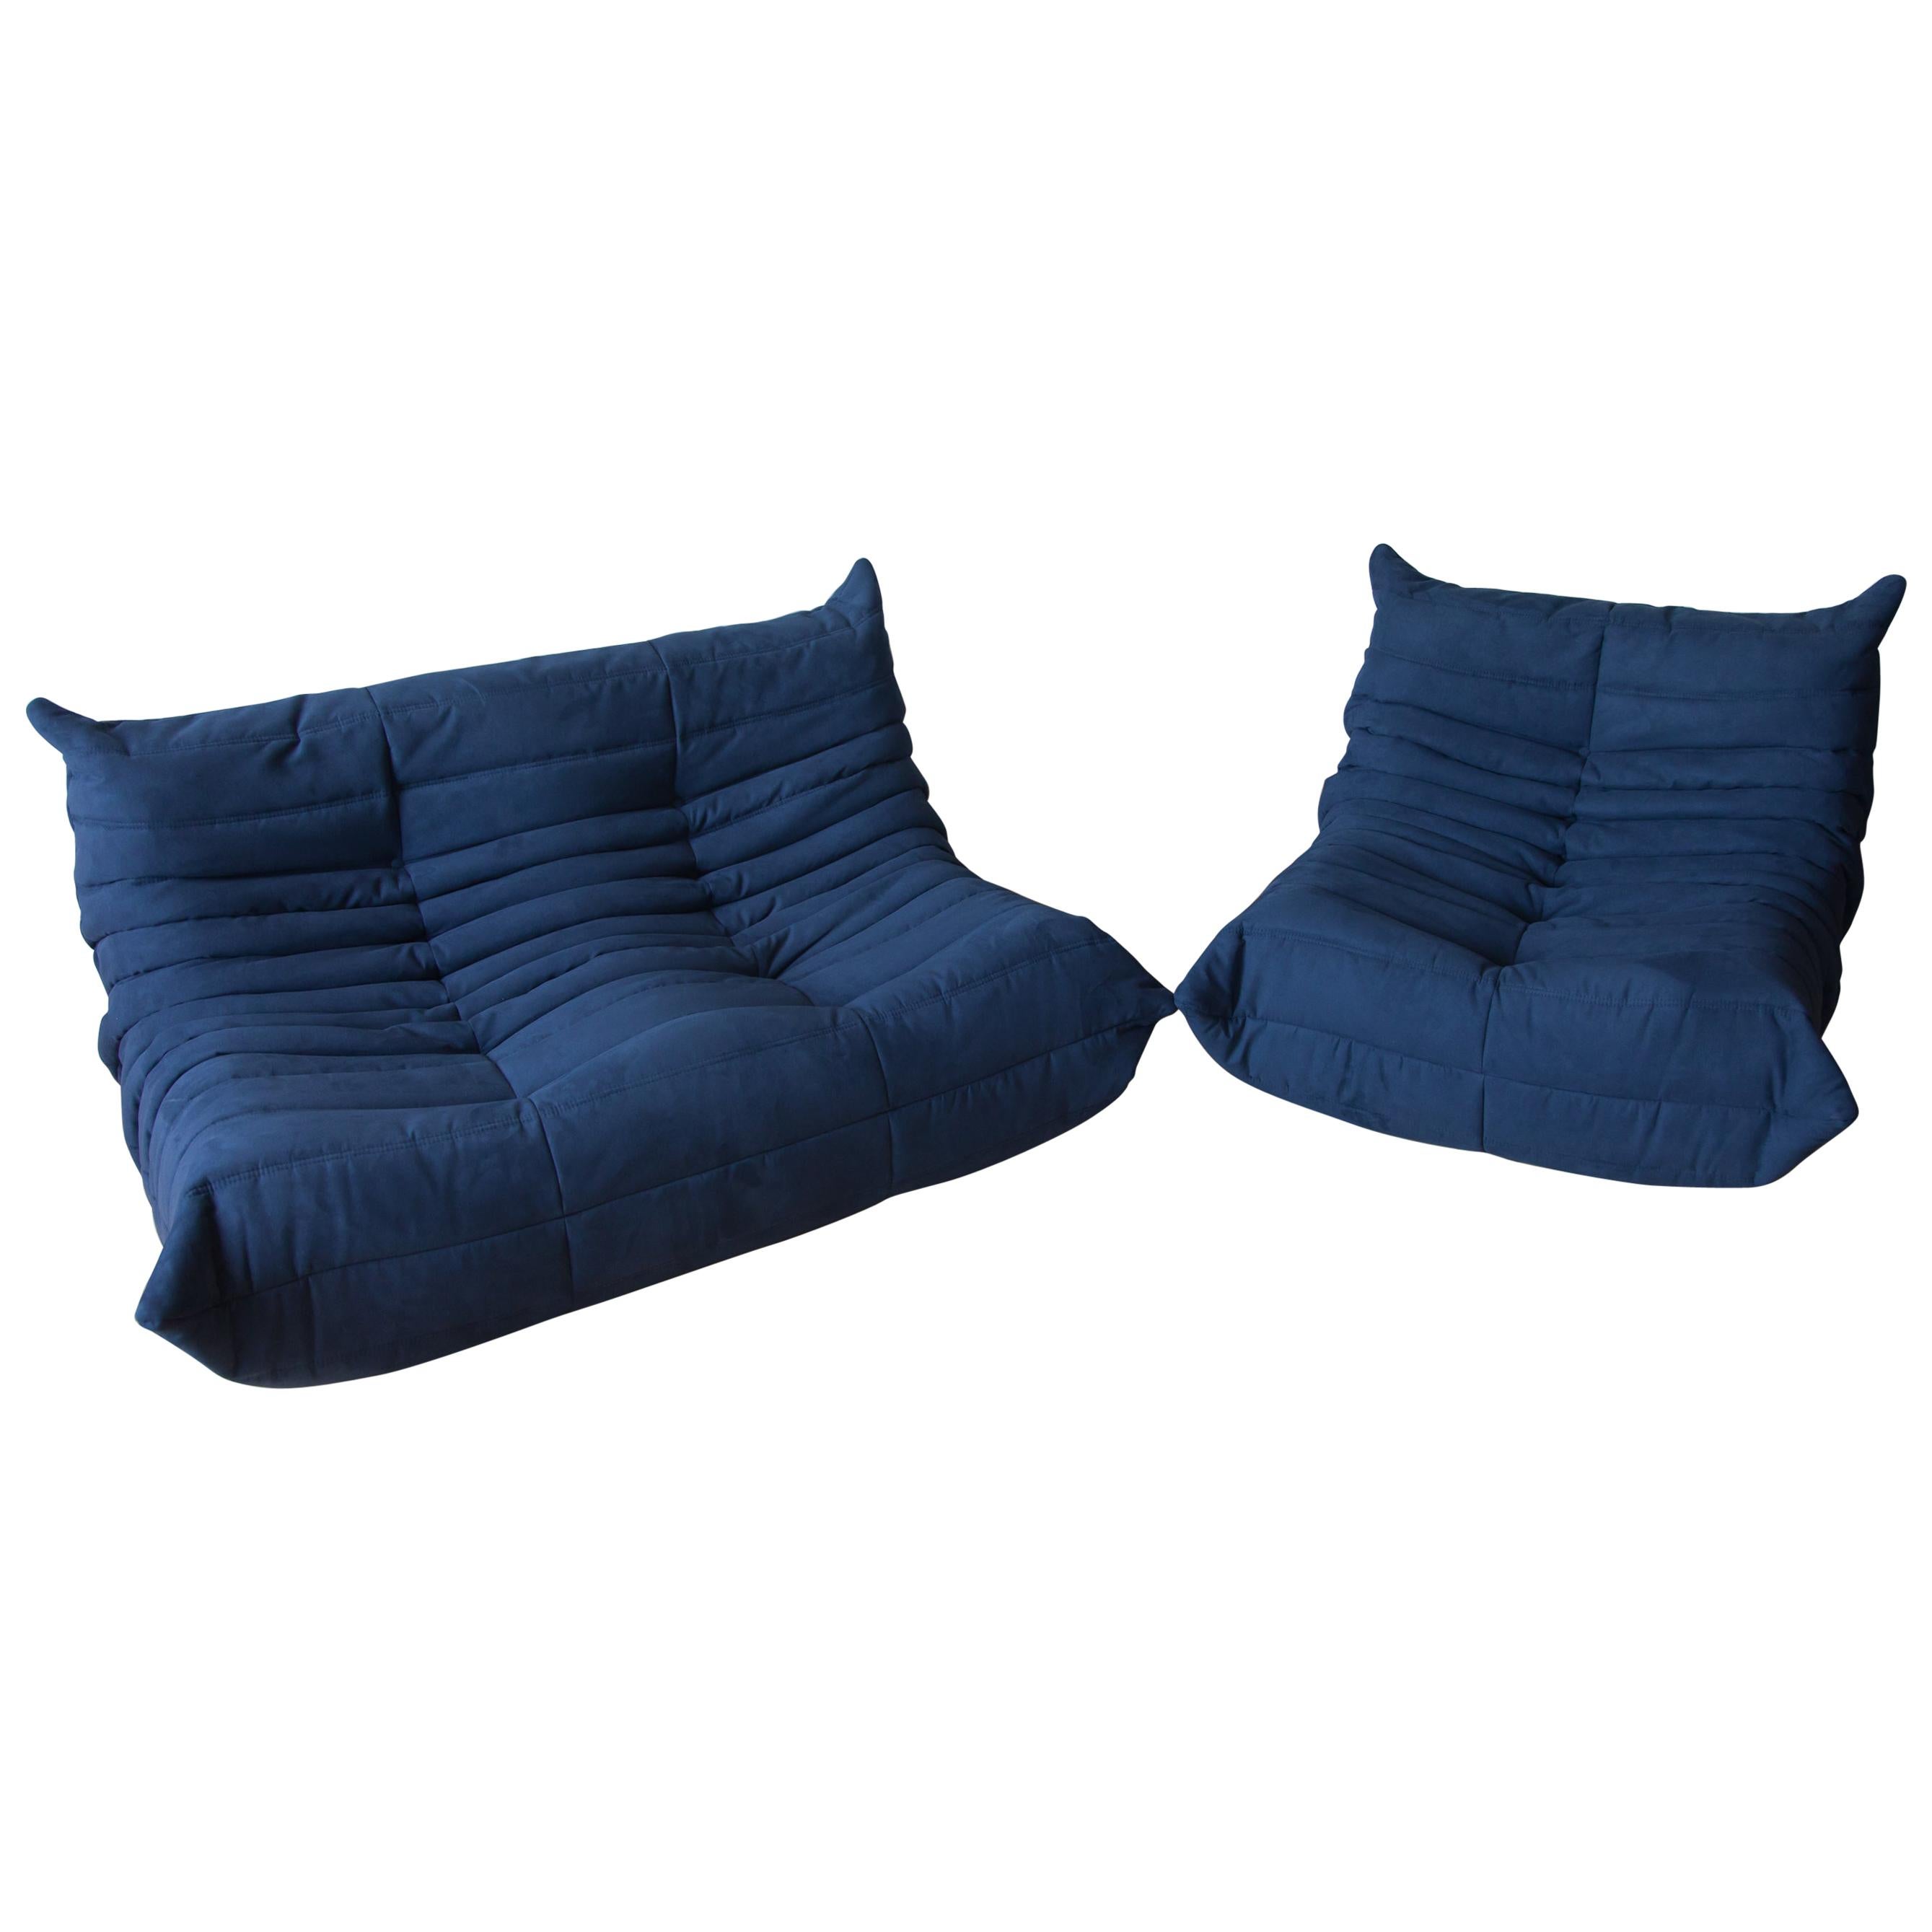 Togo Two-Piece Set, Design by Michel Ducaroy, Manufactured by Ligne Roset For Sale